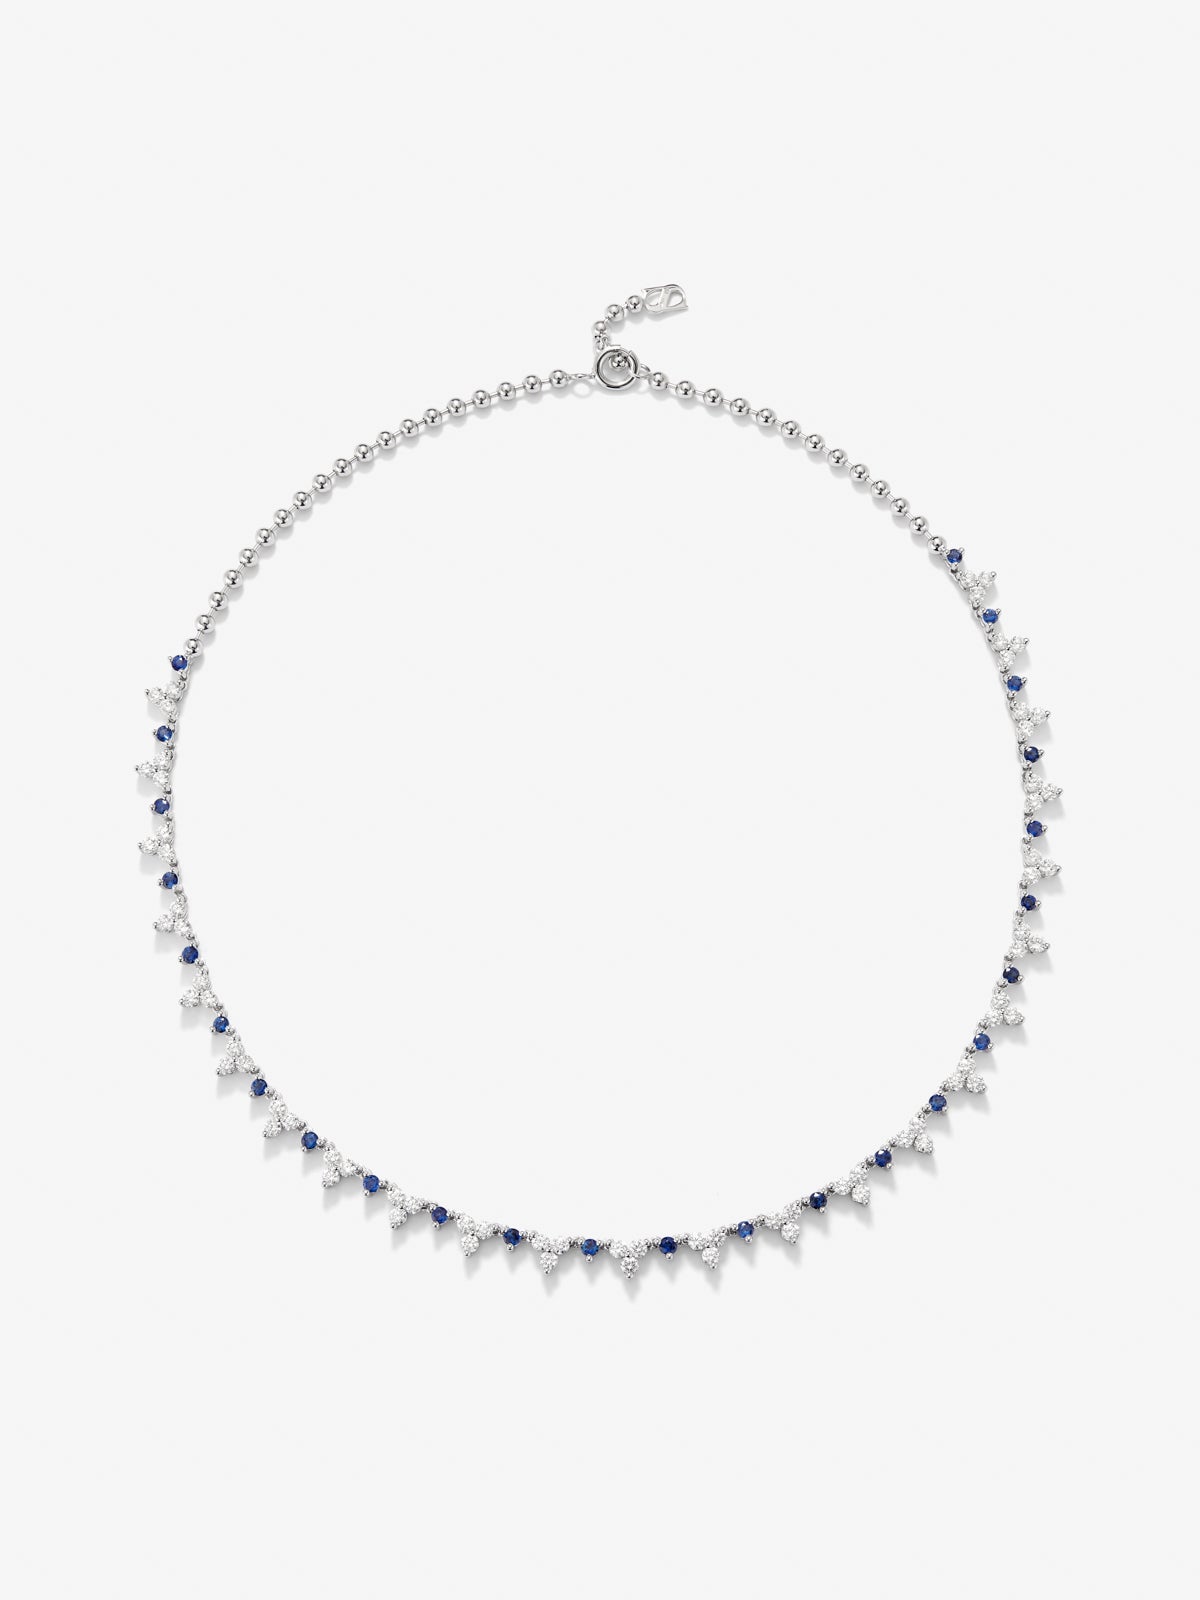 18K white gold rivière necklace with 25 brilliant-cut blue sapphires with a total of 1.7 cts and 72 brilliant-cut diamonds with a total of 3.97 cts